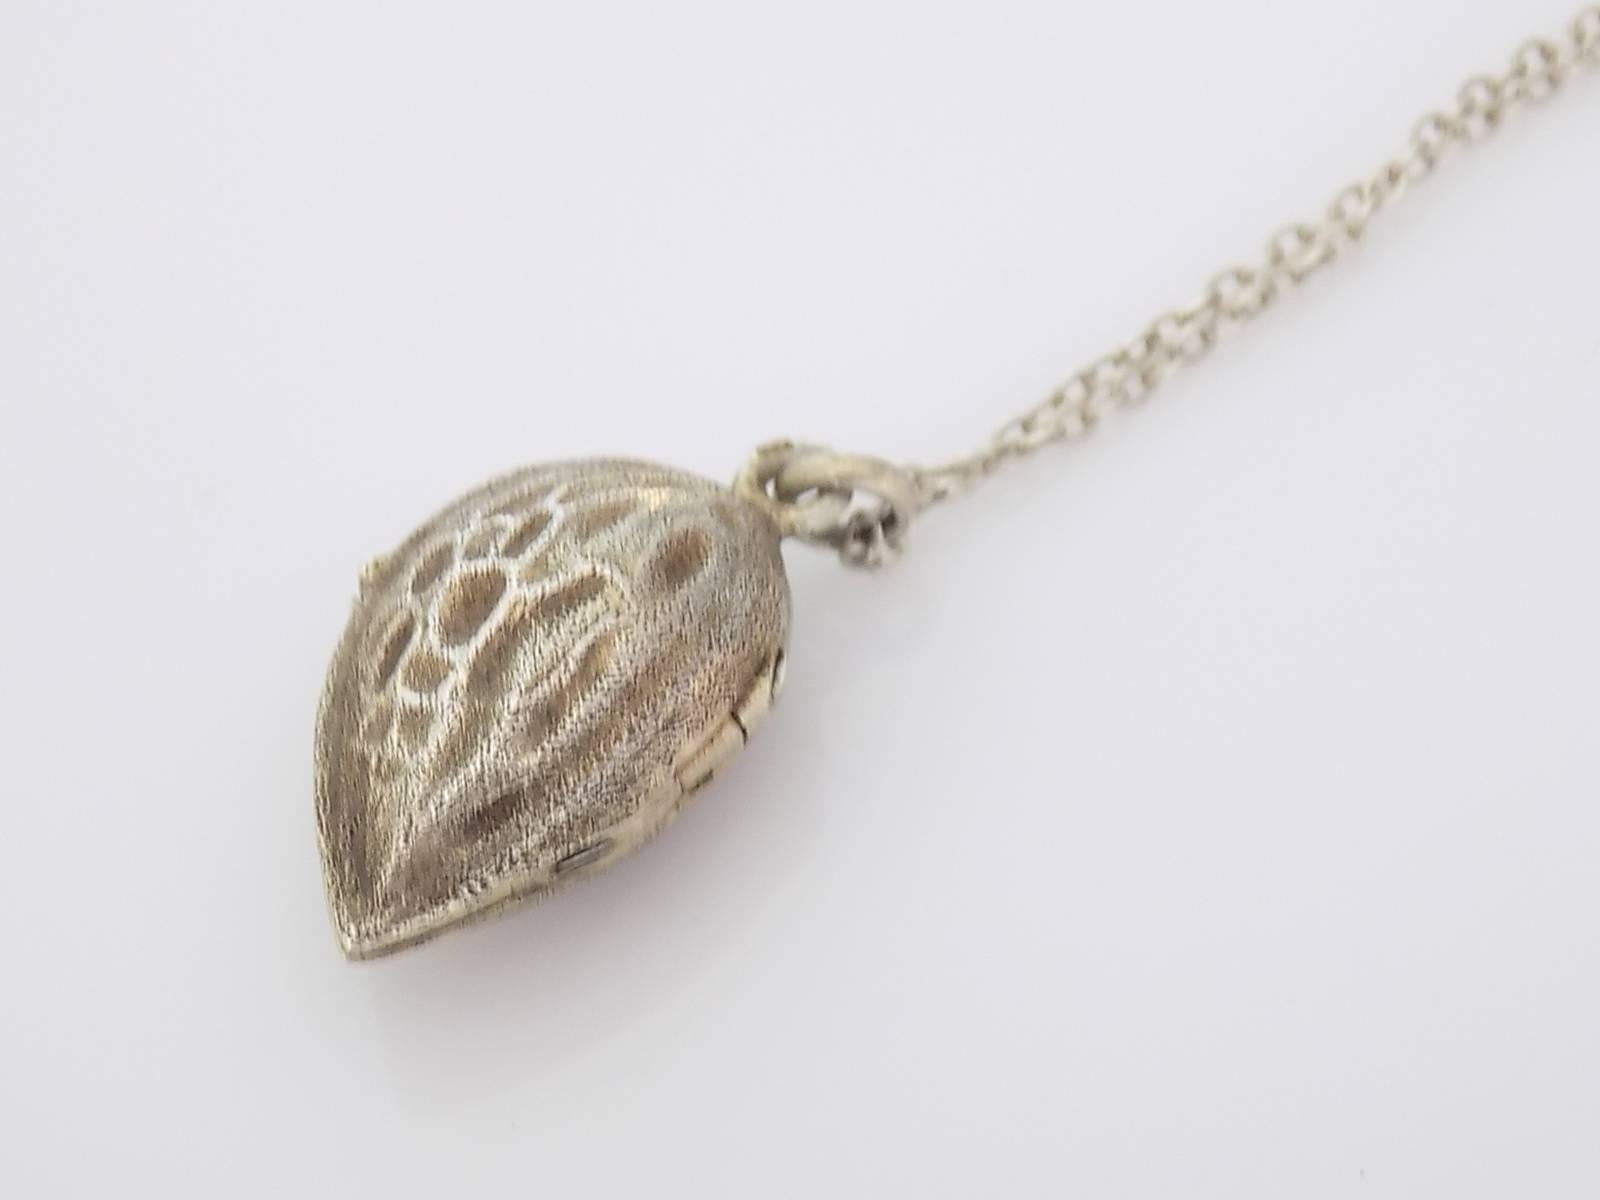 Antique Victorian Silver Almond Locket Pendant on Silver Chain Necklace 1